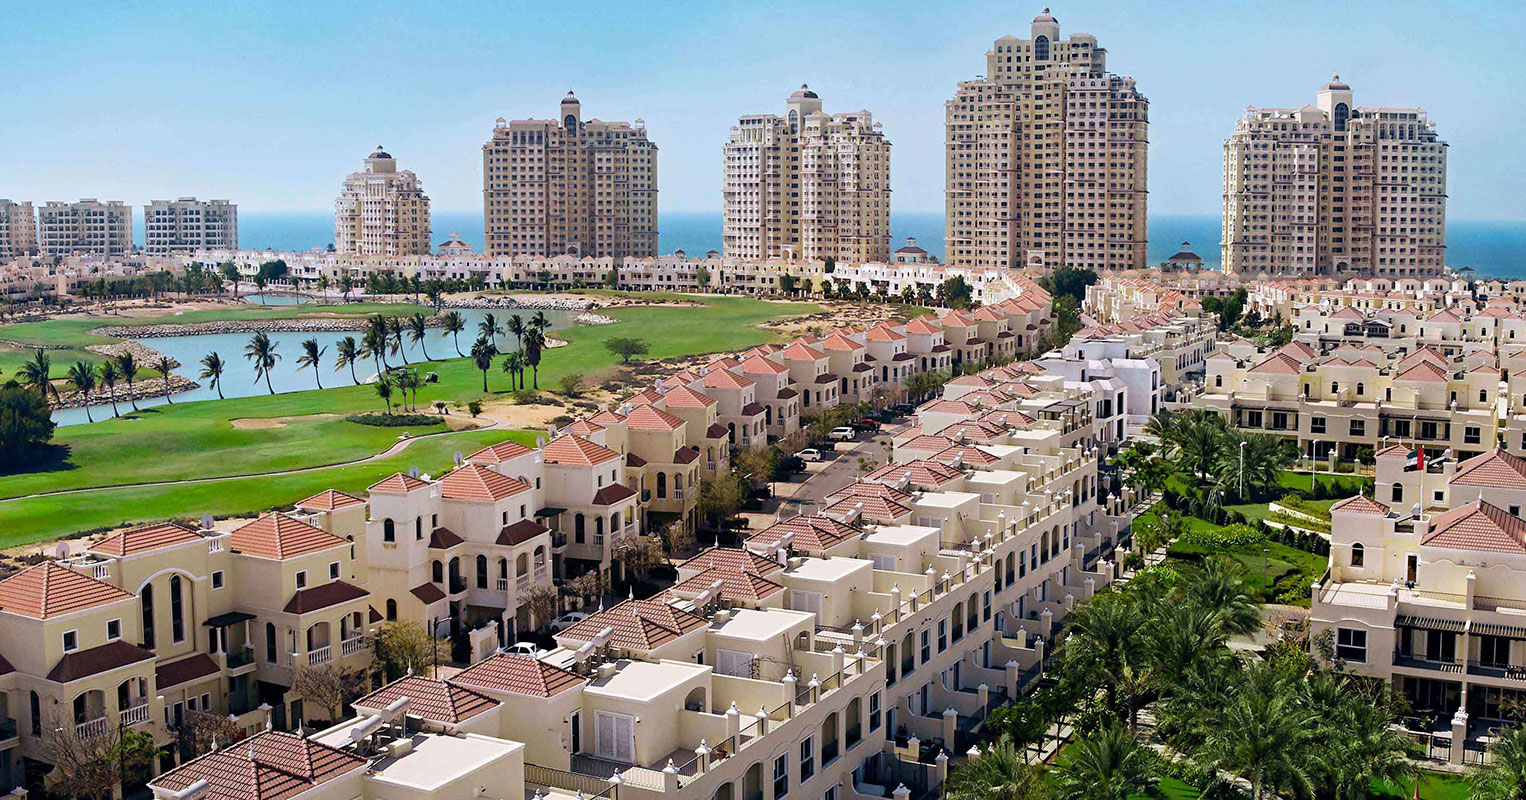 Experience the Exquisite Beauty of Al Hamra Village in Ras Al Khaimah - A Stunning Residential Community with Beachfront Views and Luxurious Architecture!